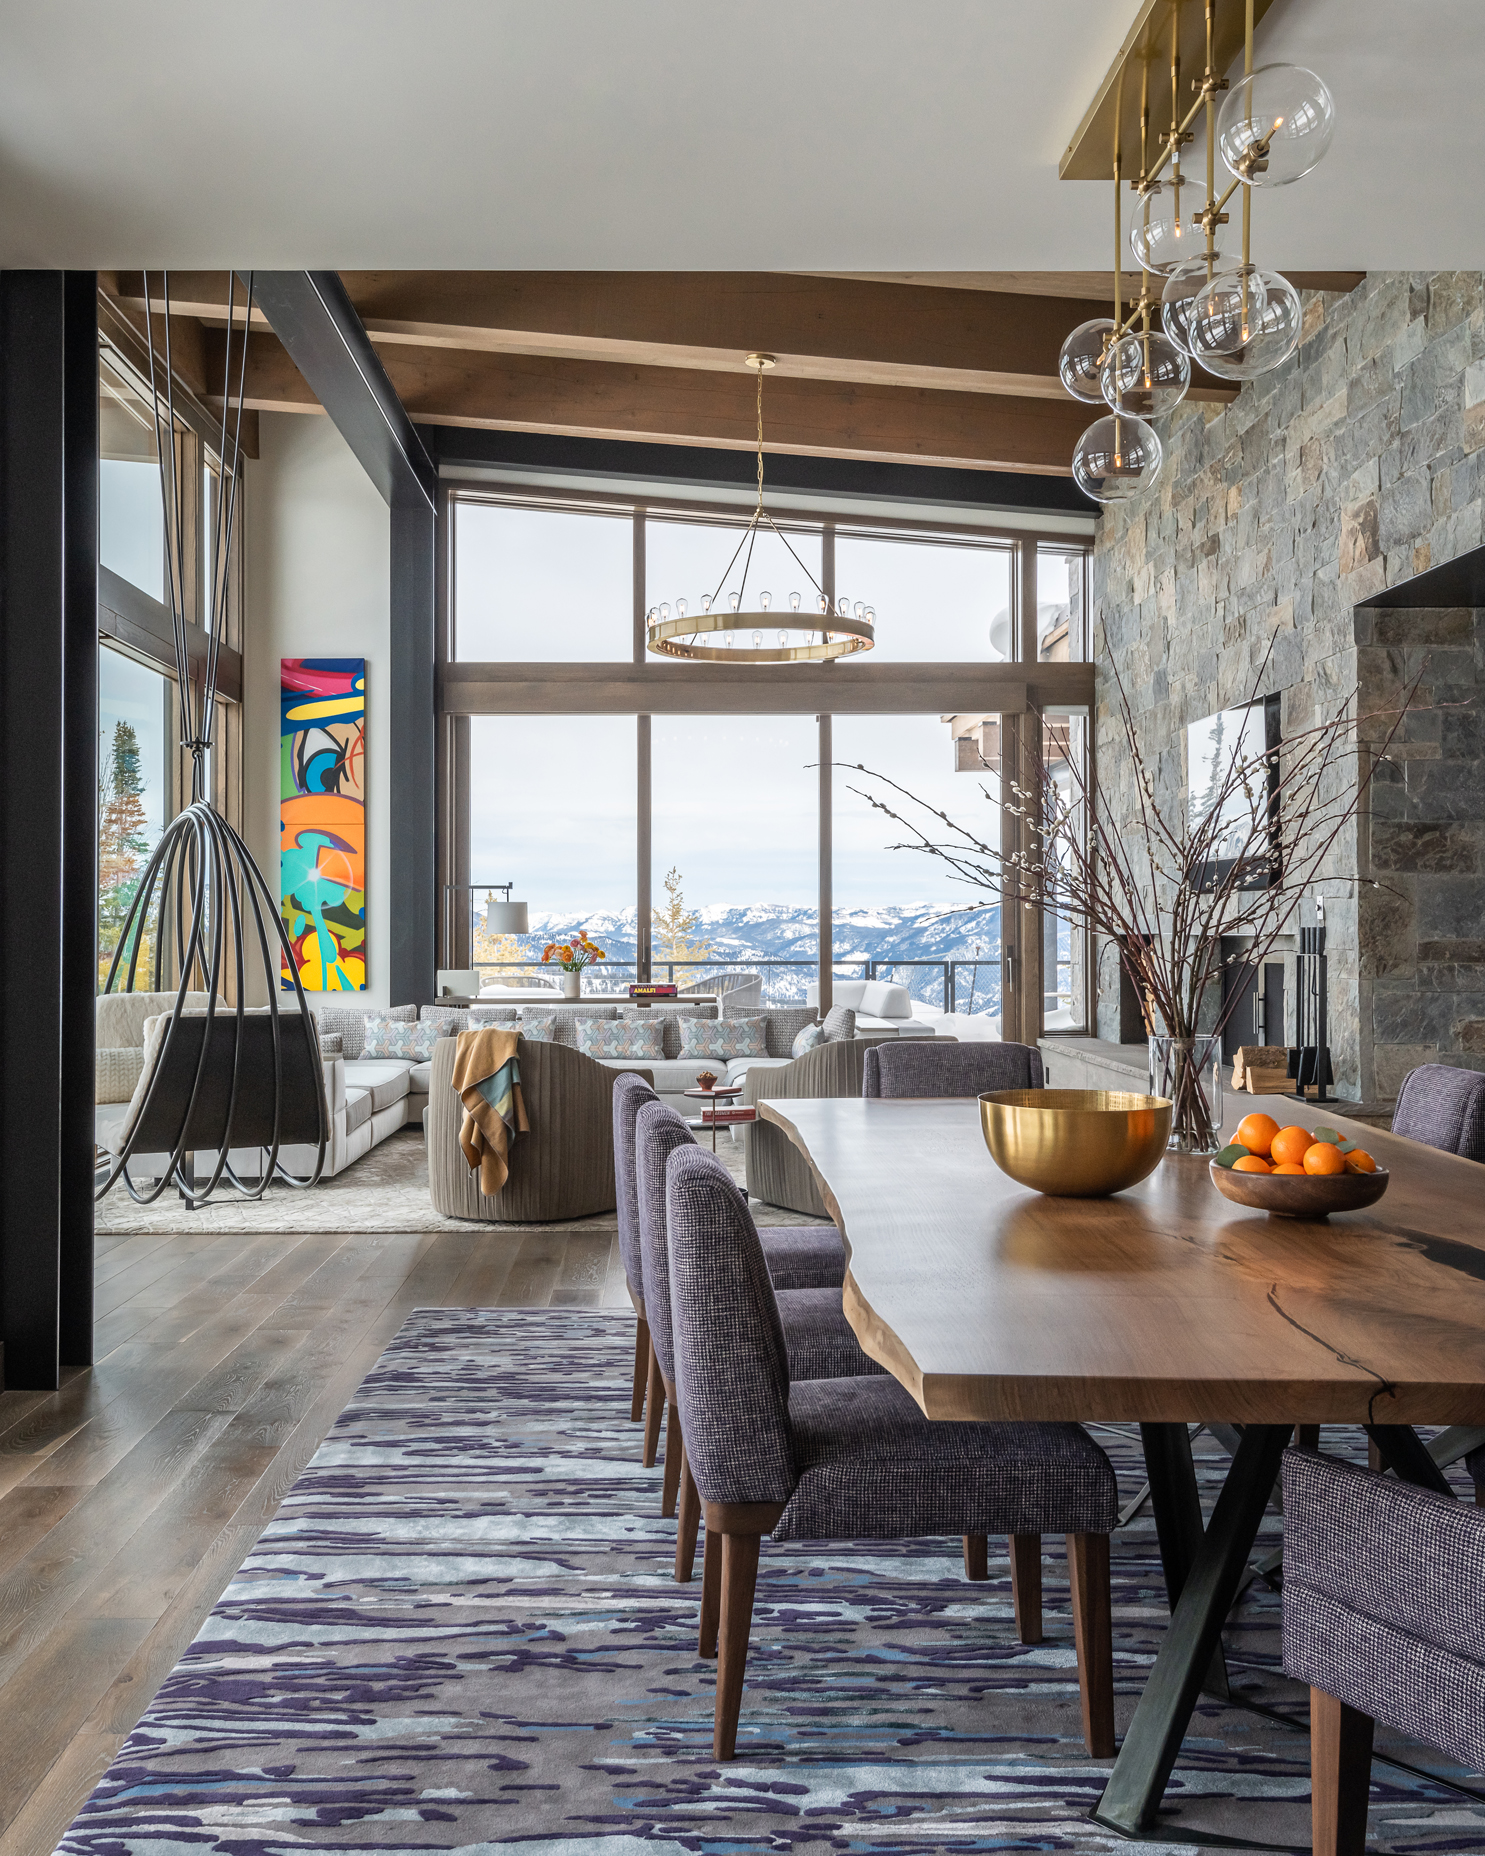 In her interview with “Business of Home,” Envi Interior Design owner Susie Hoffmann discusses her design work for clients in Montana’s exclusive Yellowstone Club (PC: Audrey Hall).